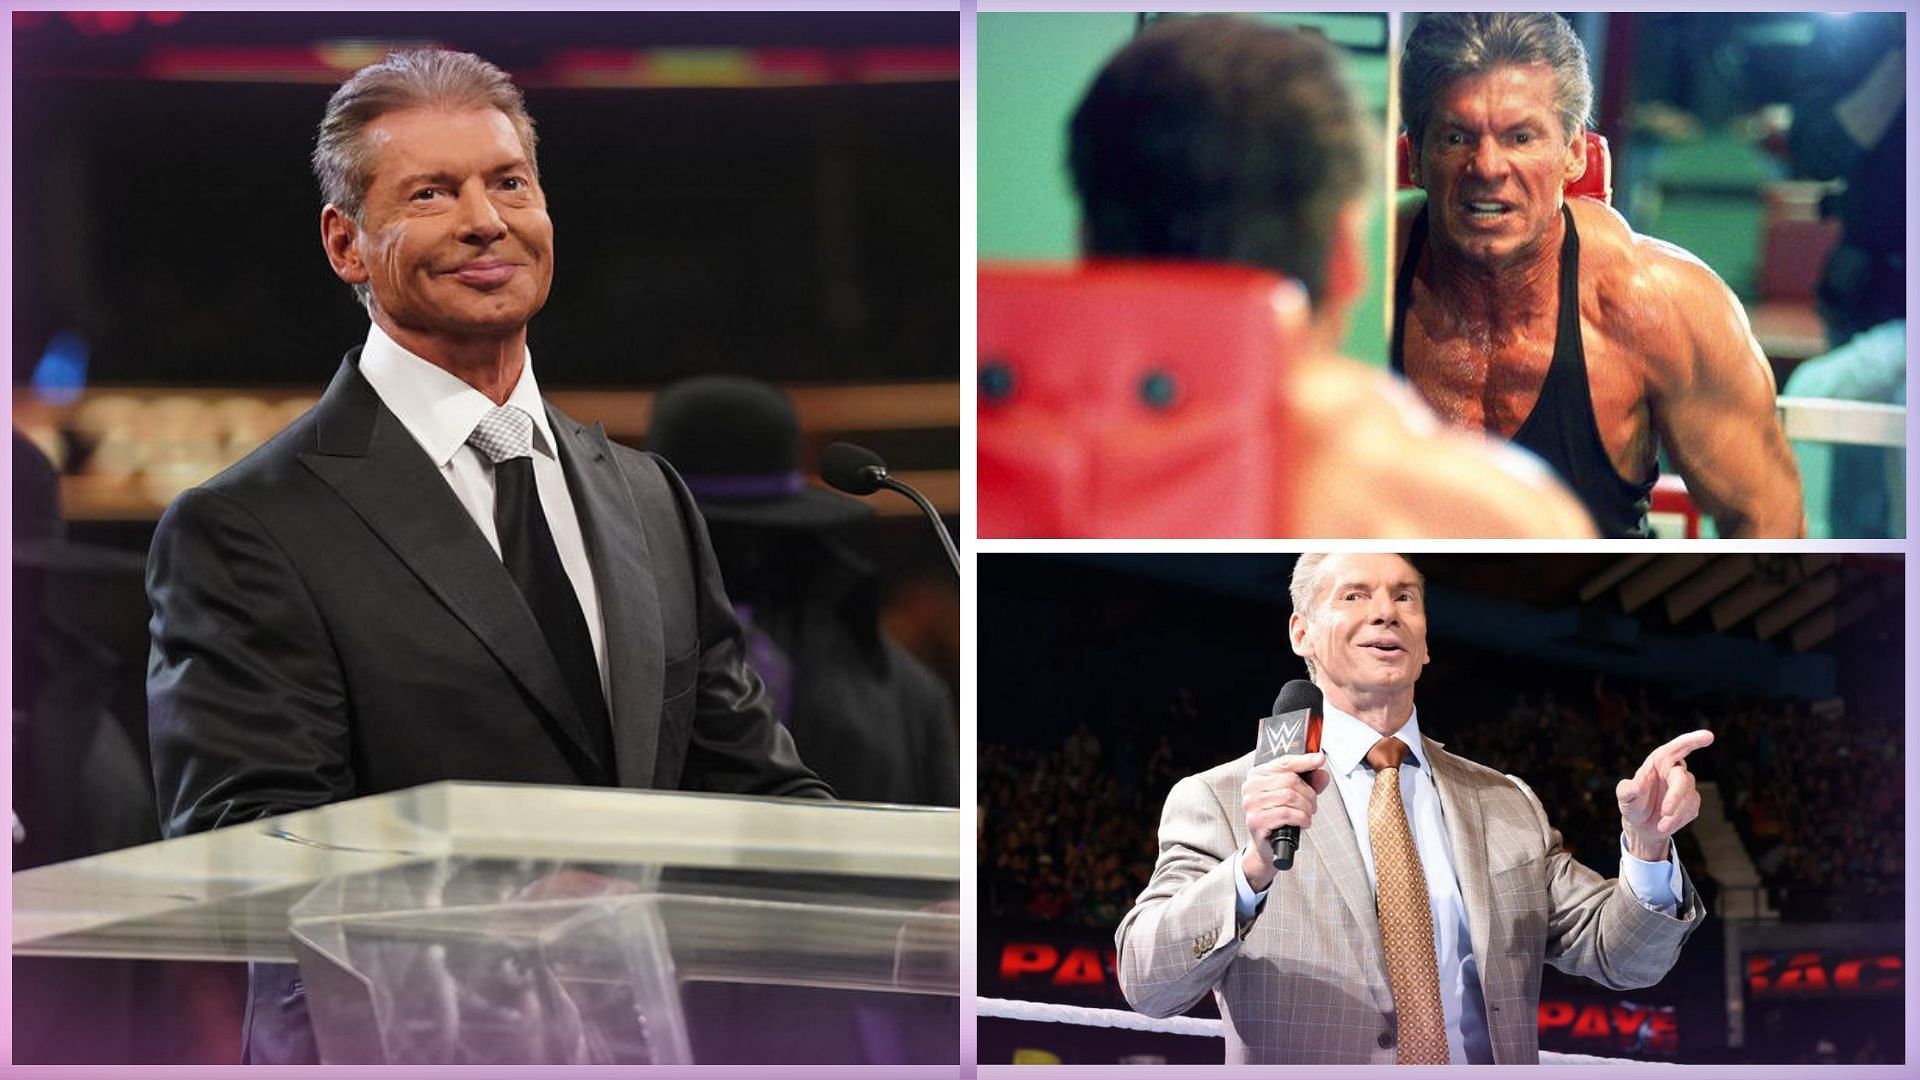 Vince McMahon has given over 40 years to WWE.